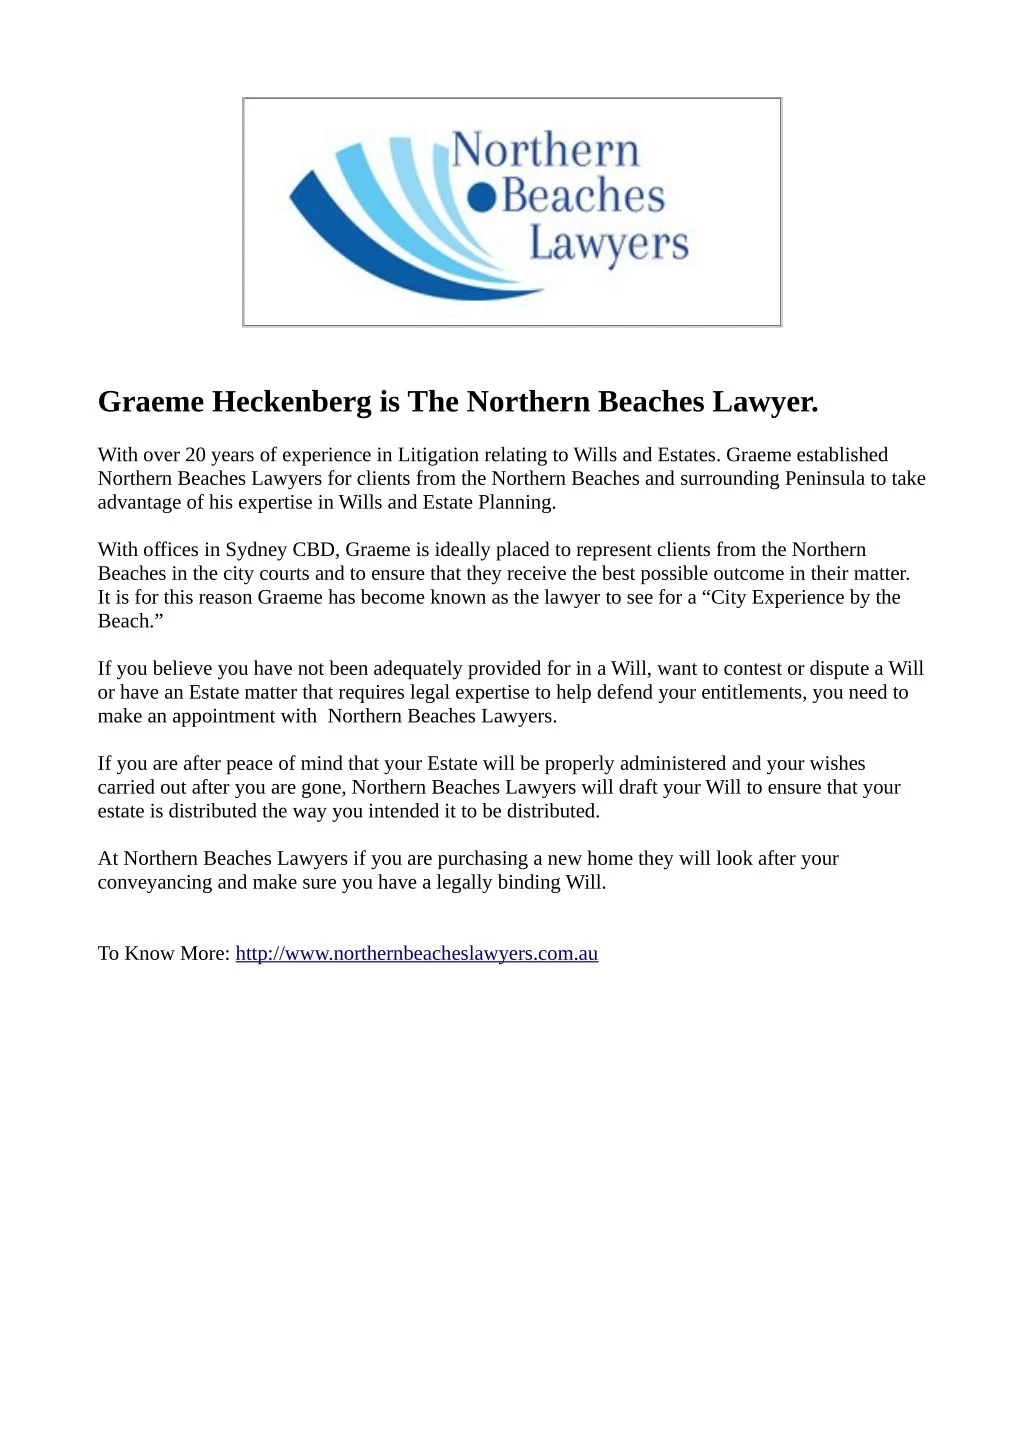 graeme heckenberg is the northern beaches lawyer